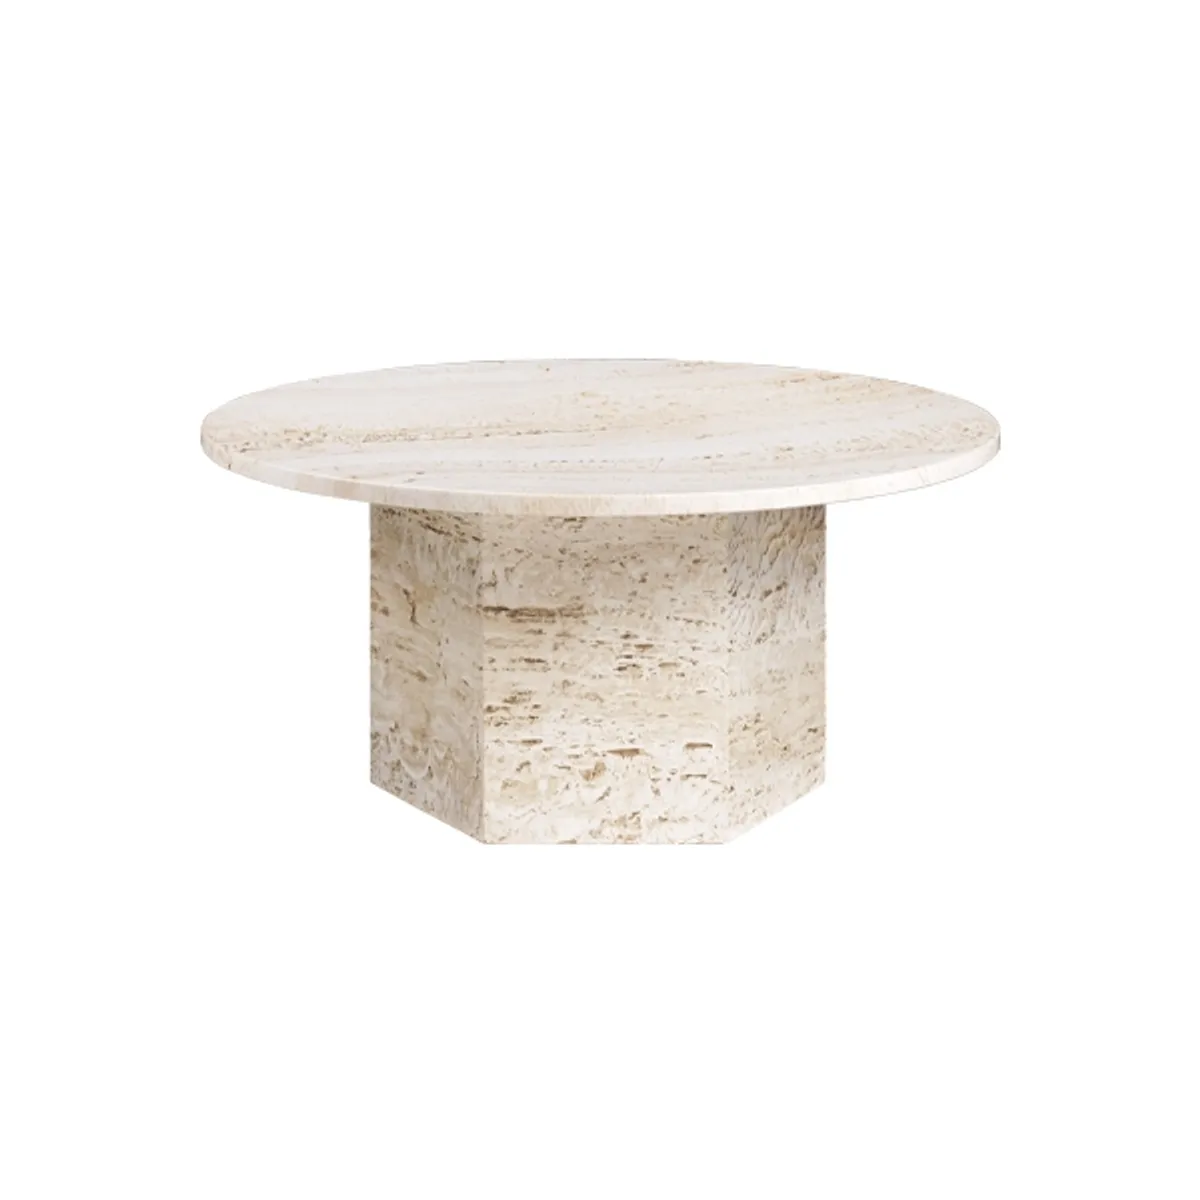 Epic stone coffee table Inside Out Contracts8